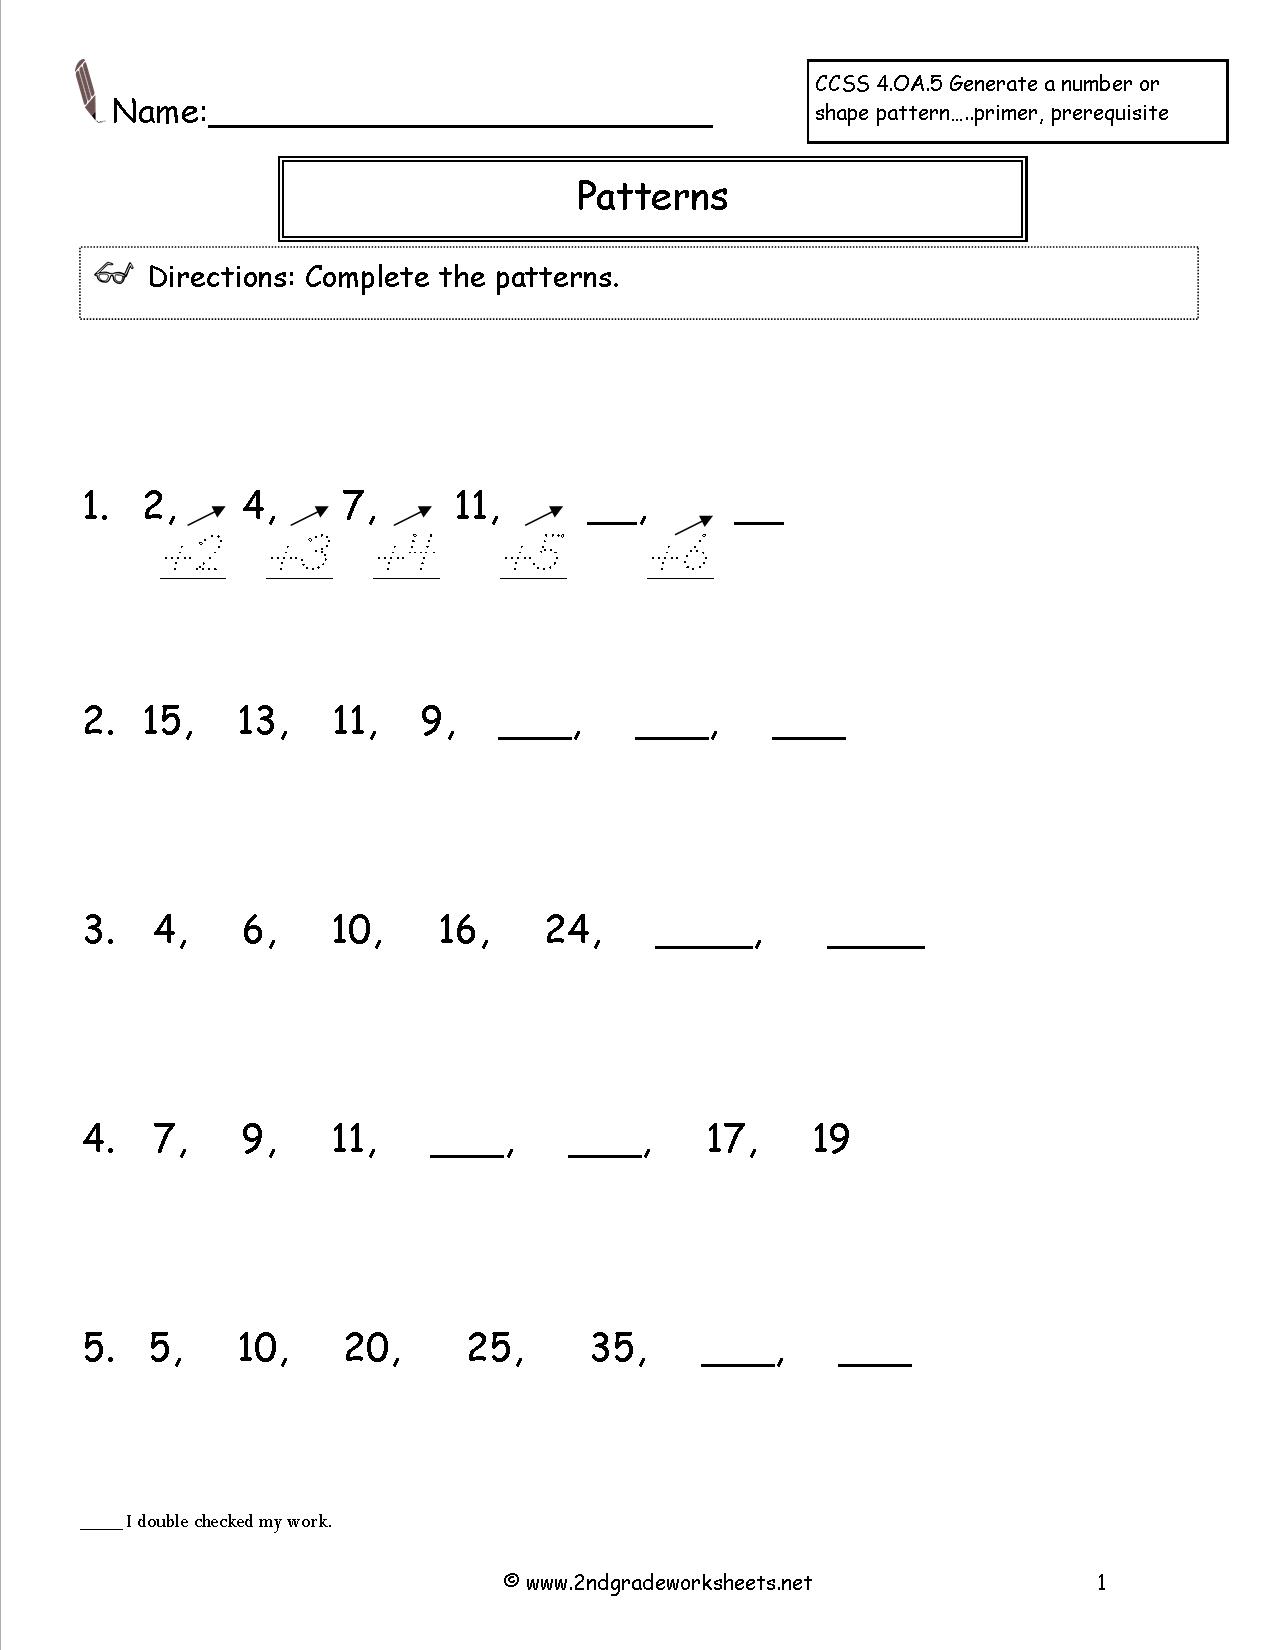 12 Best Images of Geometric Math Patterns Worksheets Middle School